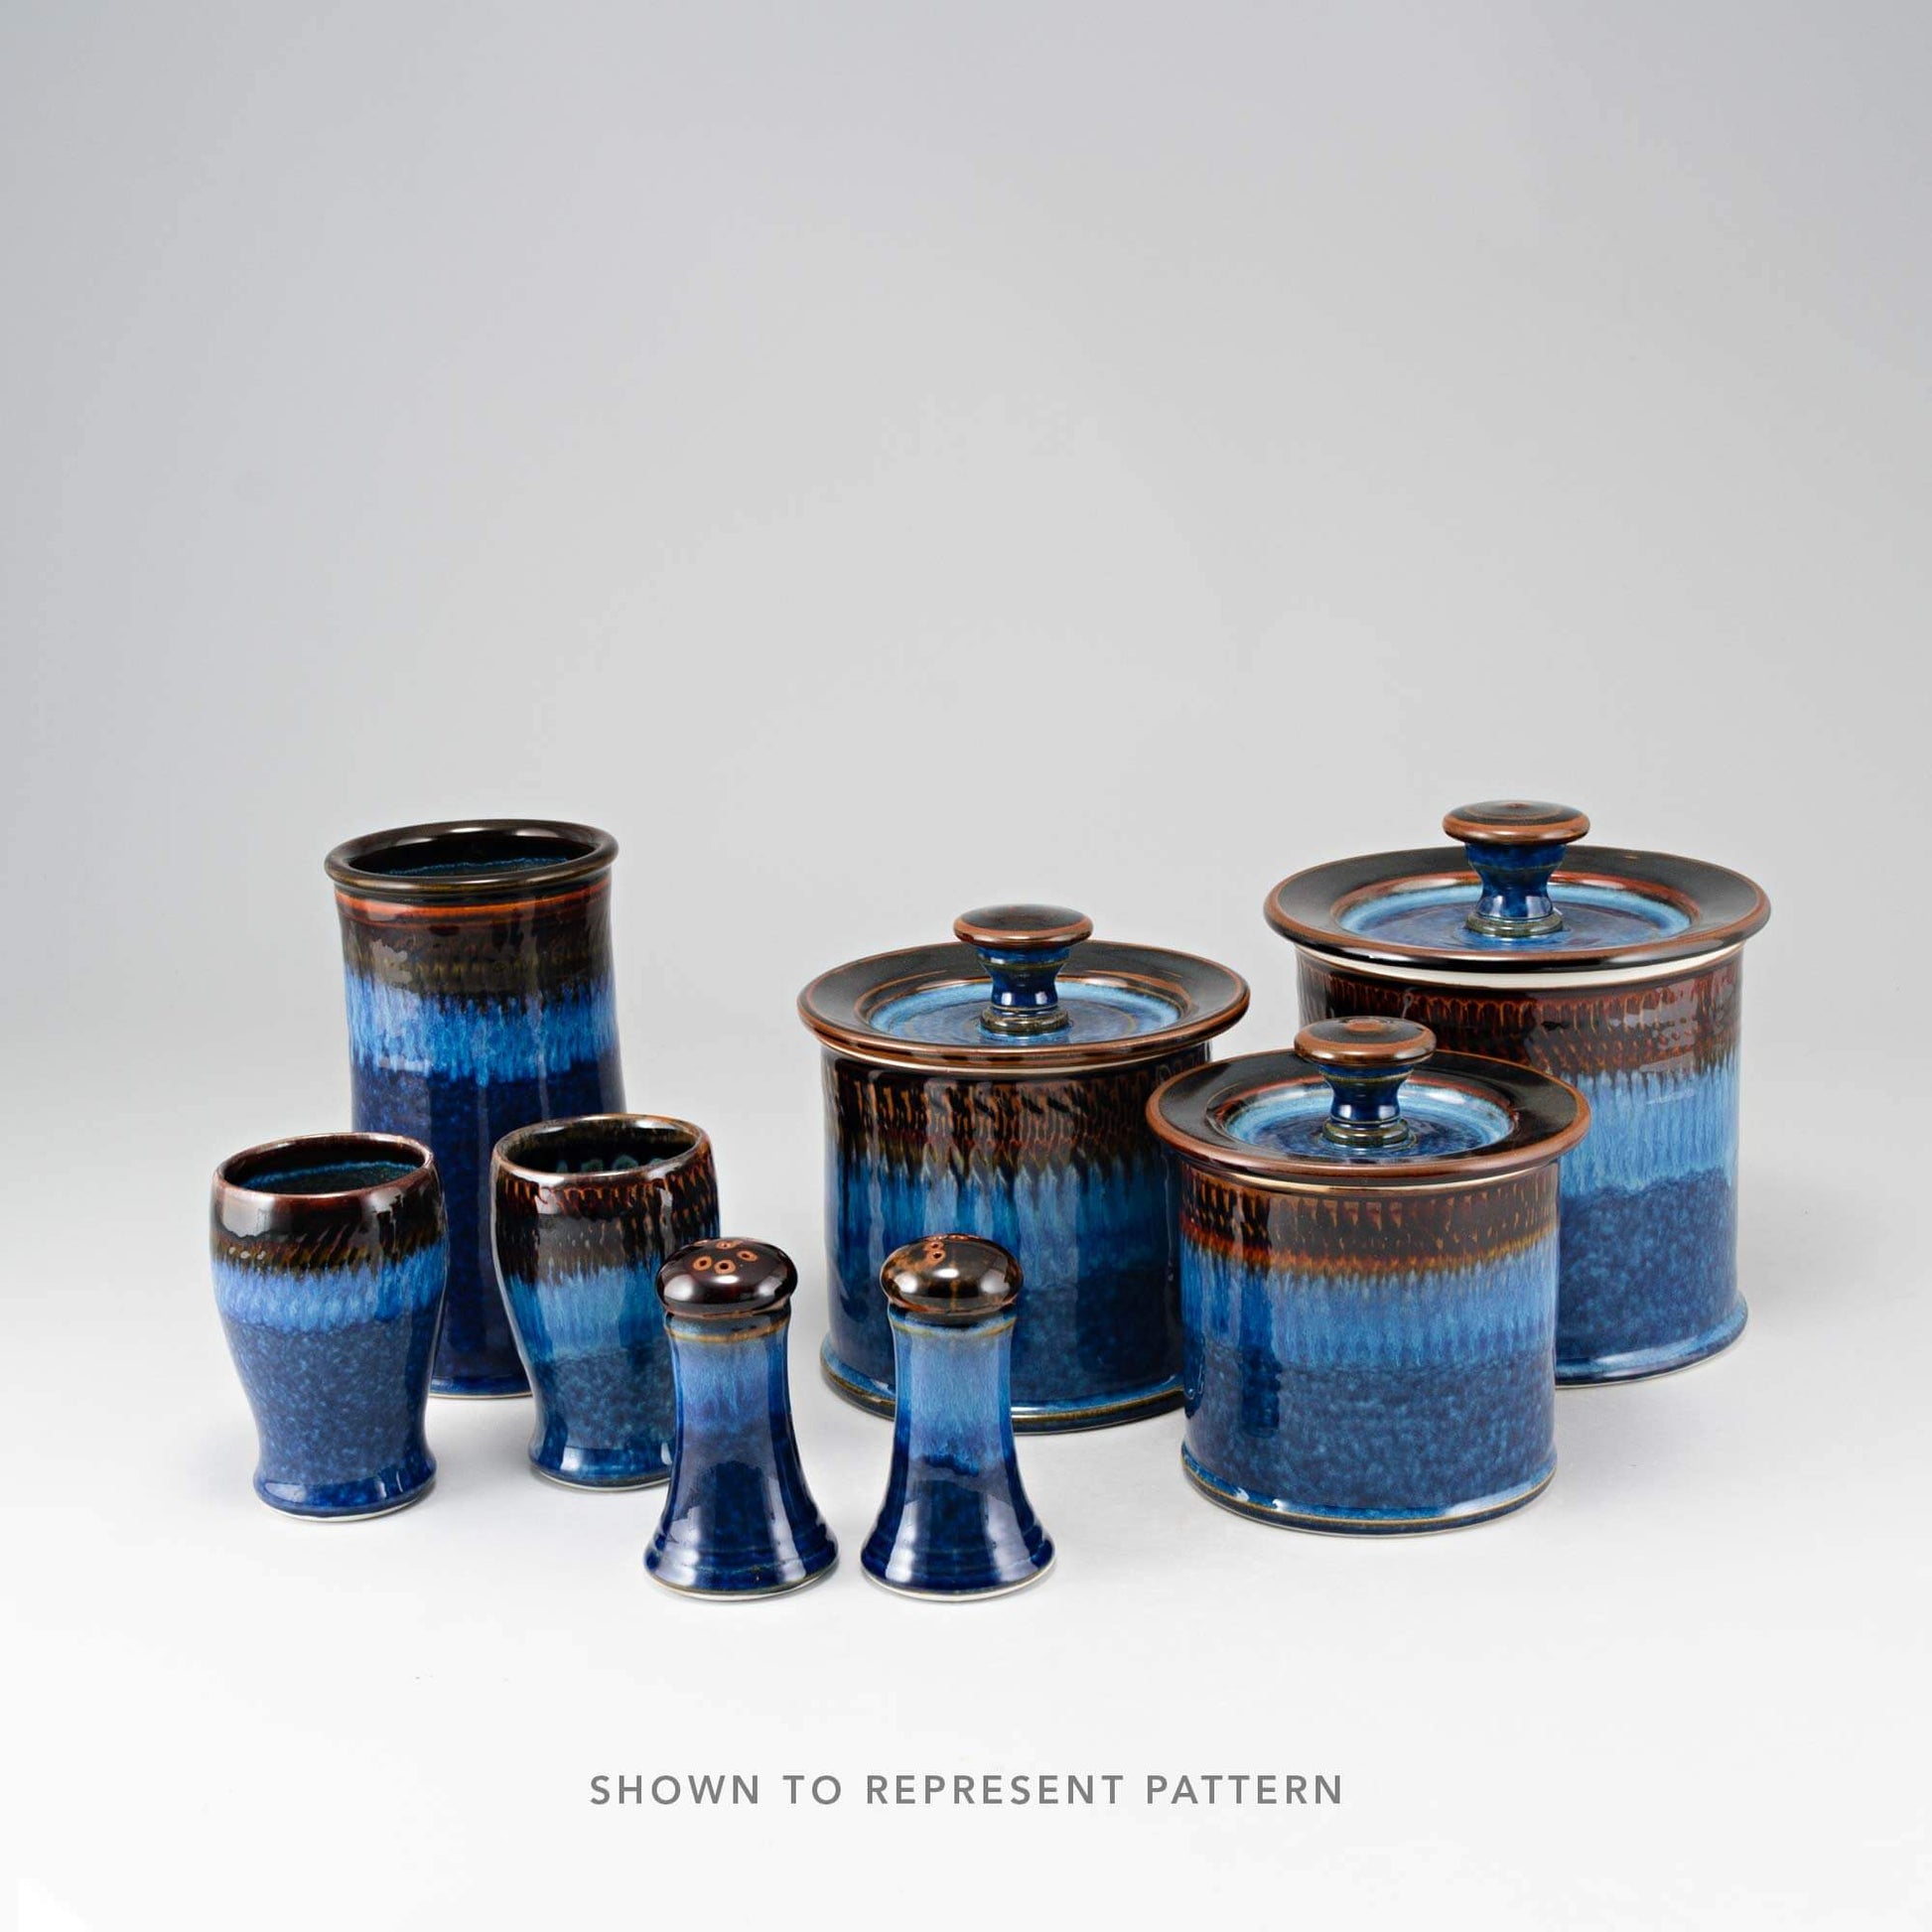 Handmade Pottery Toothbrush Holder in Blue Hamada pattern made by Georgetown Pottery in Maine